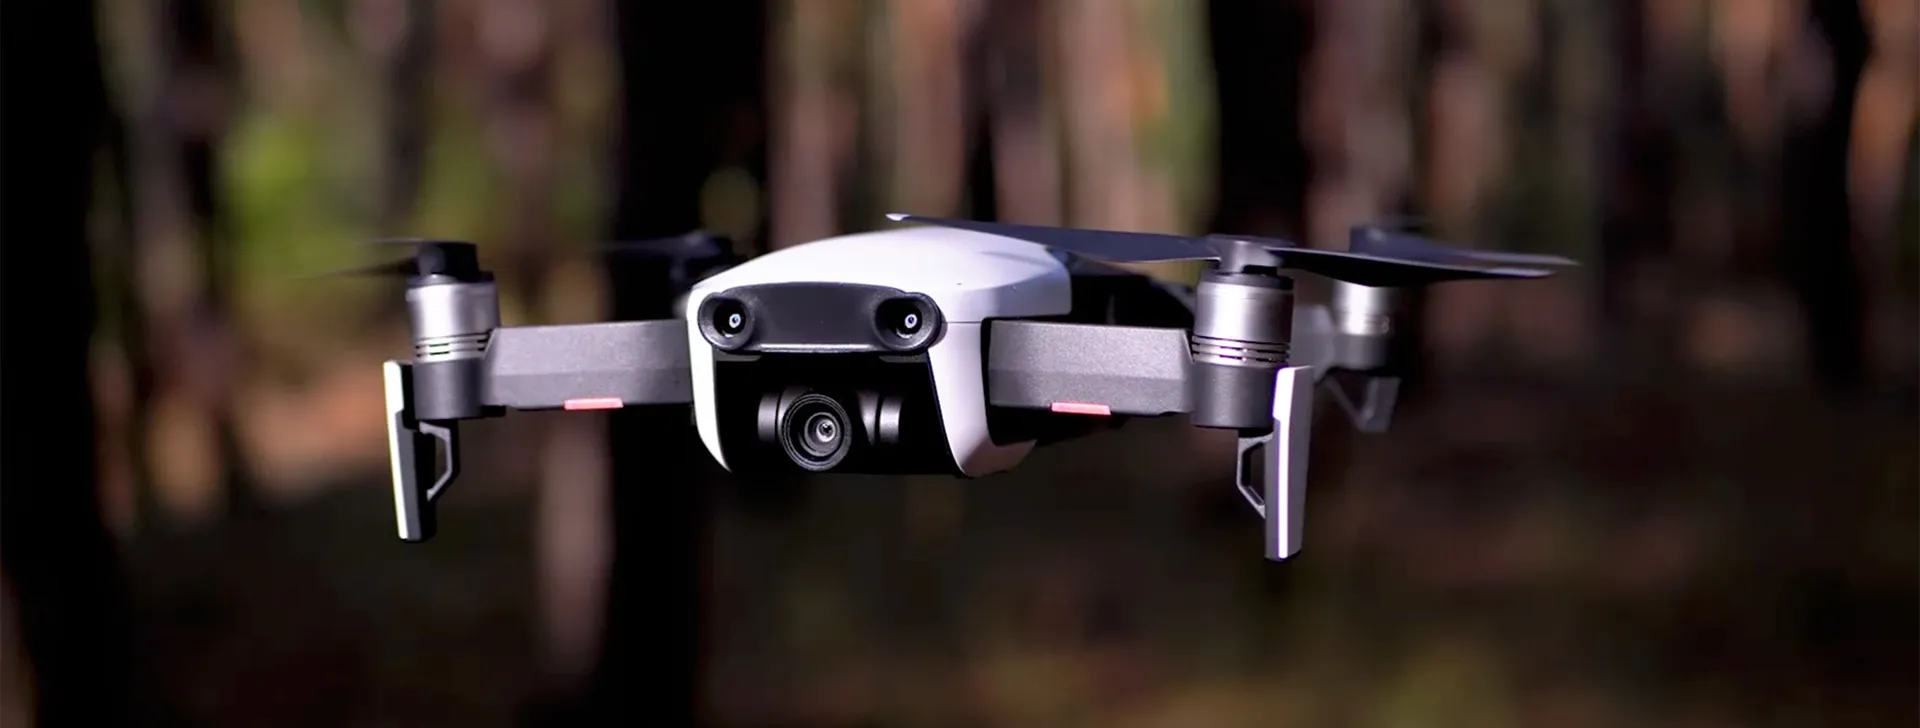 A black and white drone with a camerea.